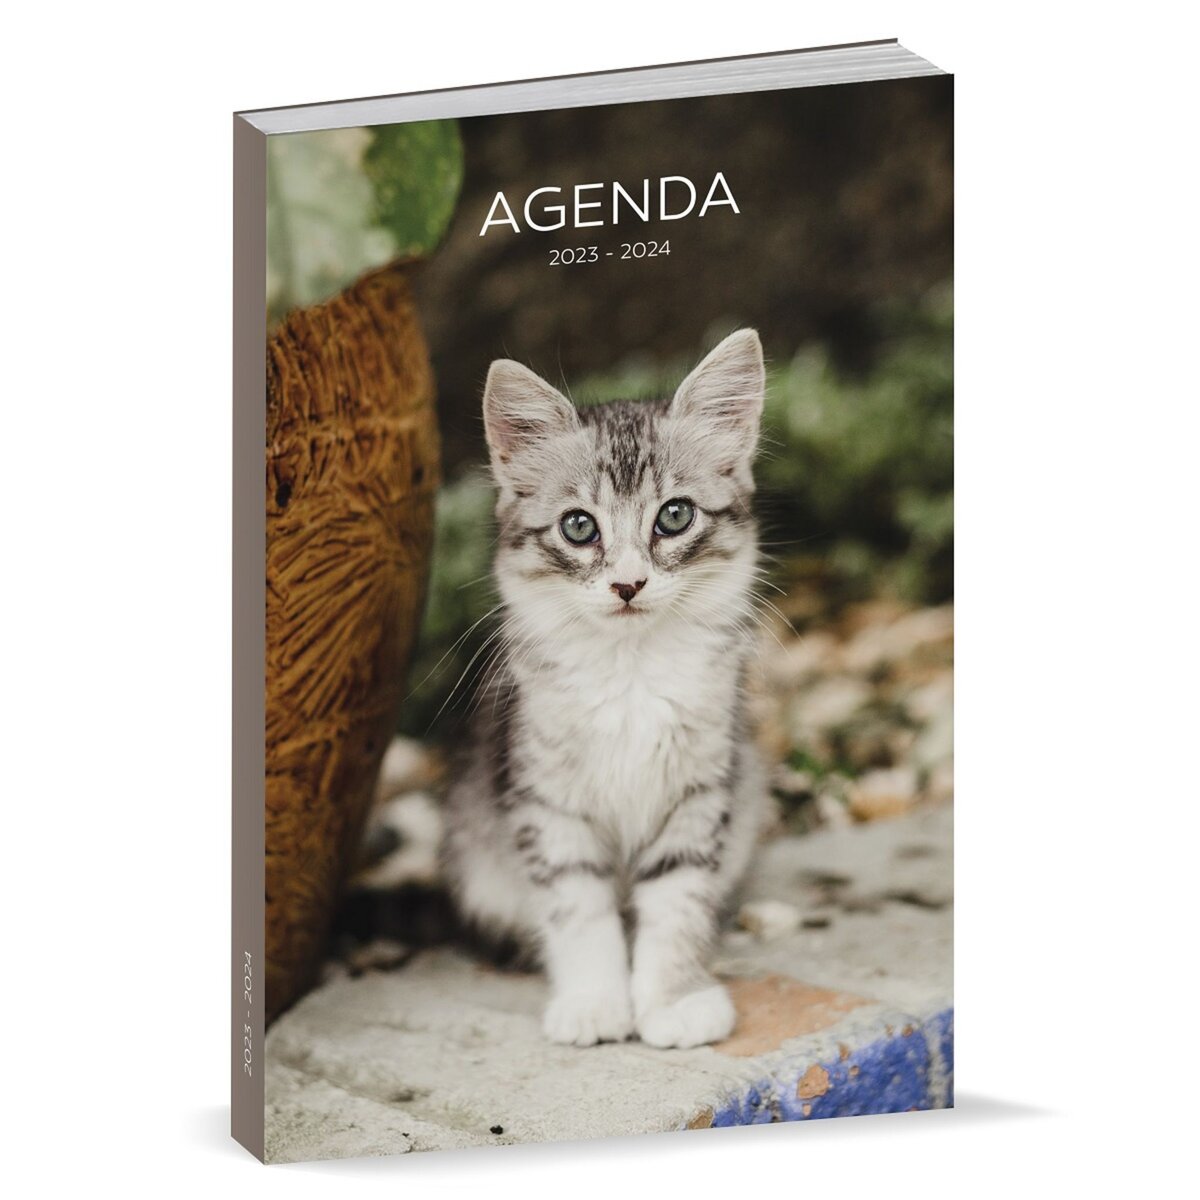  AGENDA SCOLAIRE 2023-2024: Chats chatons nuit nature